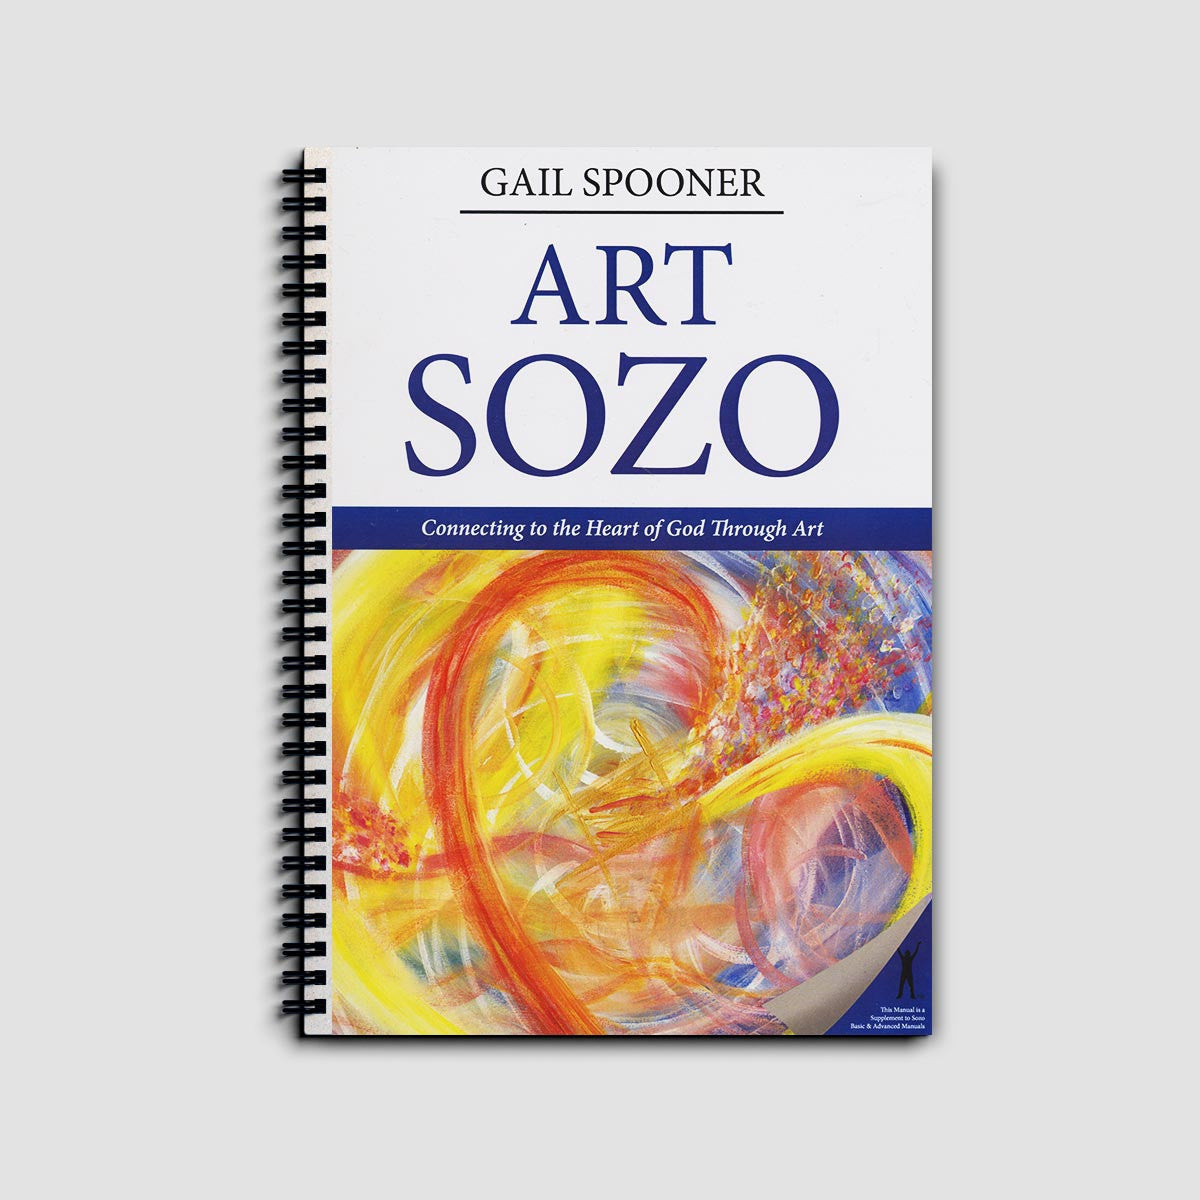 Art Sozo Manual: Connecting to the Heart of God Through Art